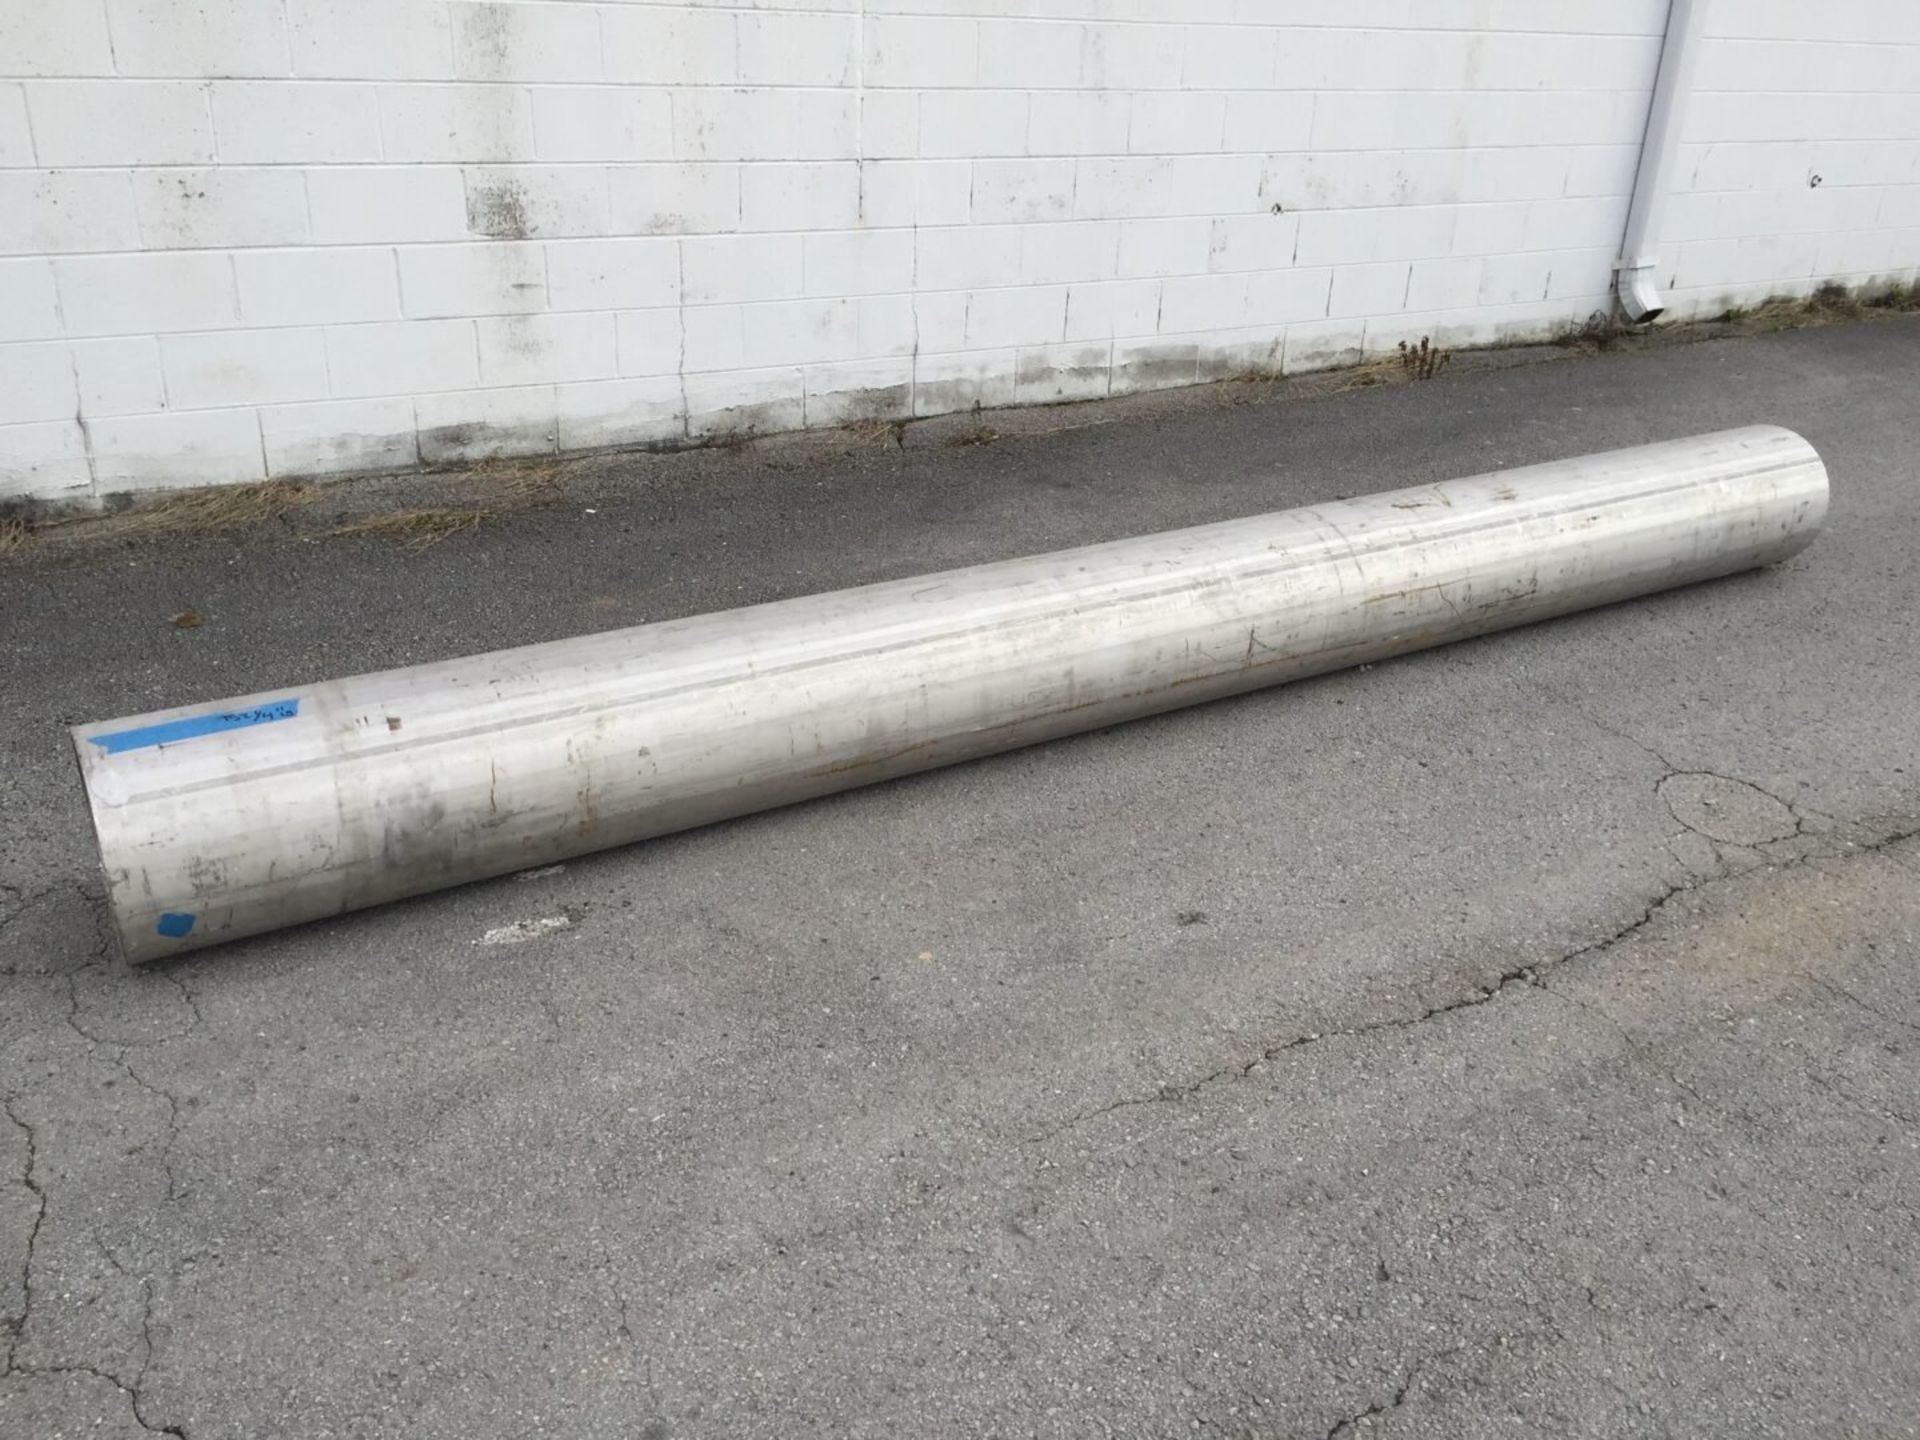 Stainless Steel Pipe 14.125" x 14.125" x 152" L